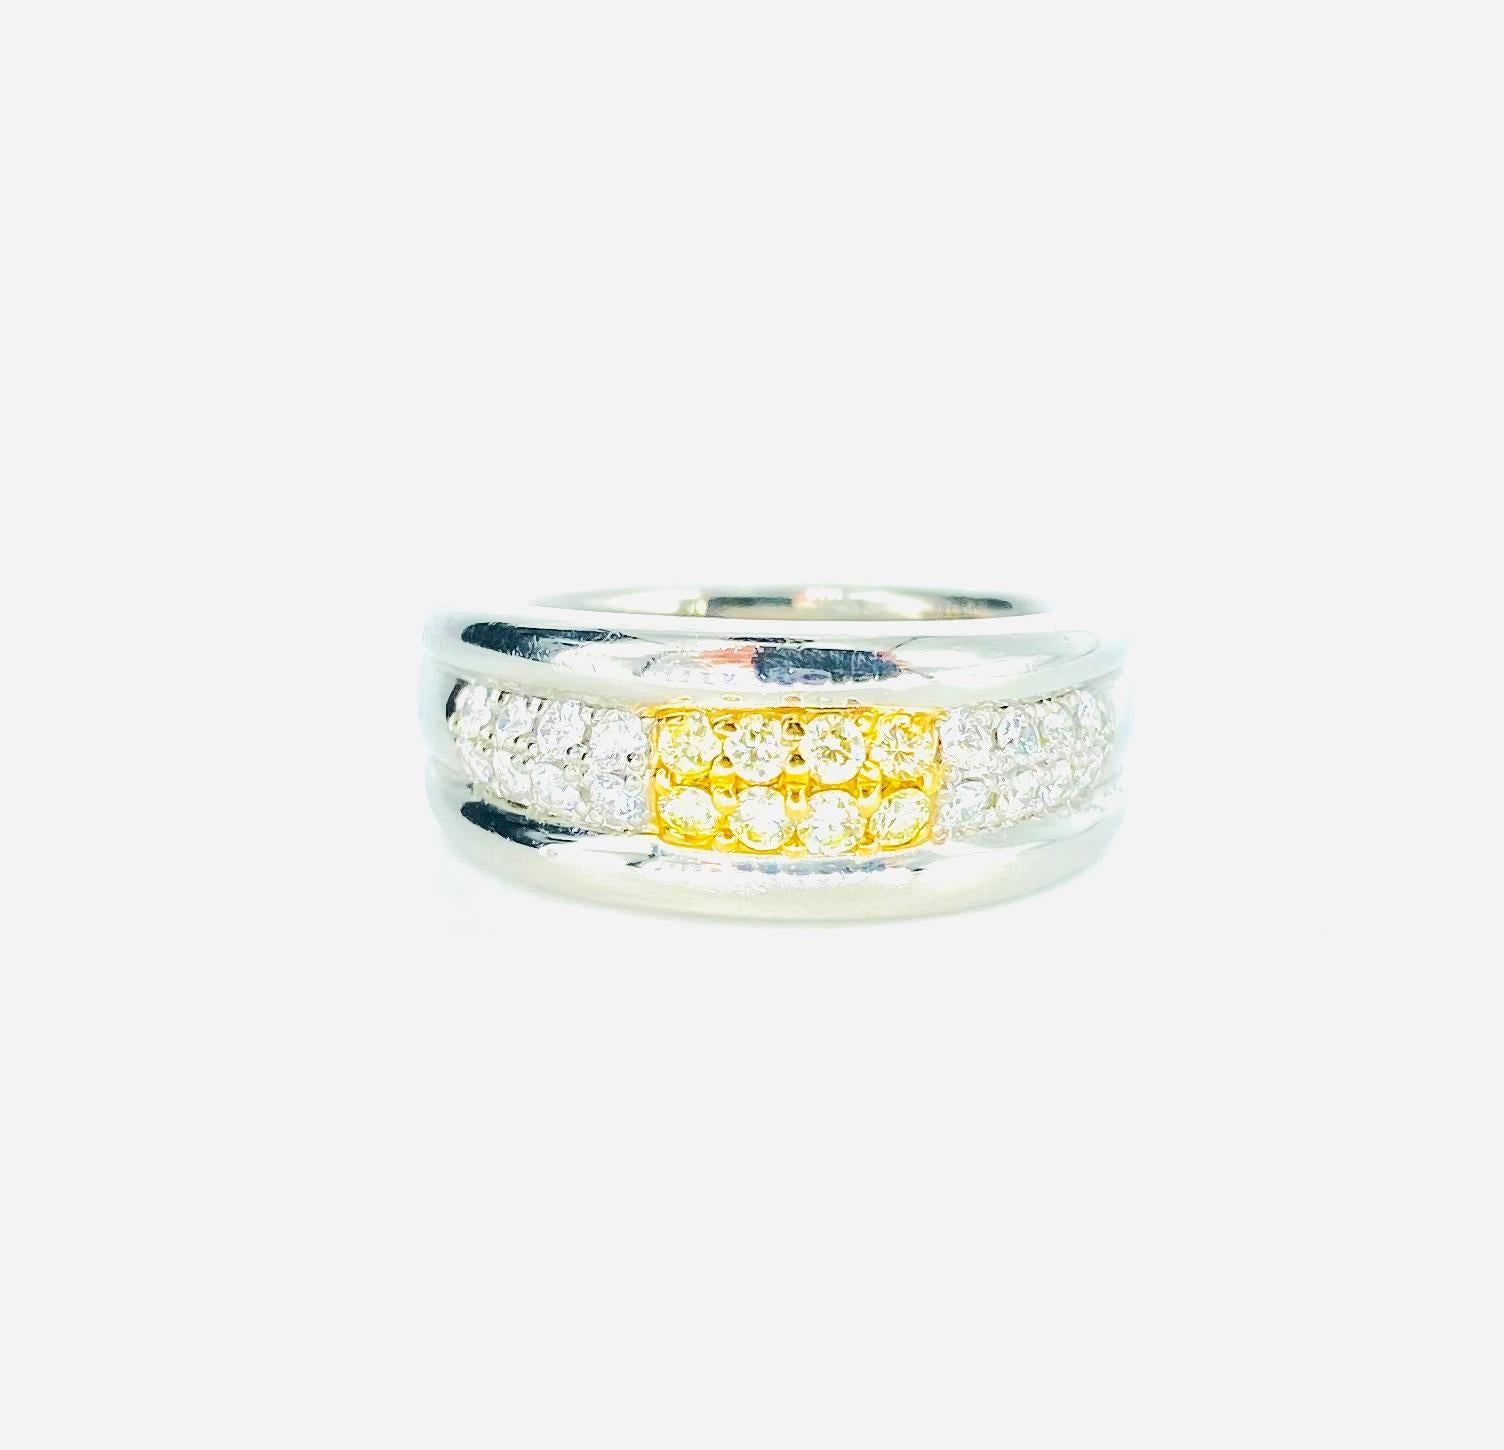 Designer 0.46 Carat Fancy Yellow & White Diamonds Platinum/18k Yellow Gold Band Ring. The ring weight 15.4 grams and is a size 6. The ring measures 8.22mm in height and is marked STUDIO 18k platinum 900